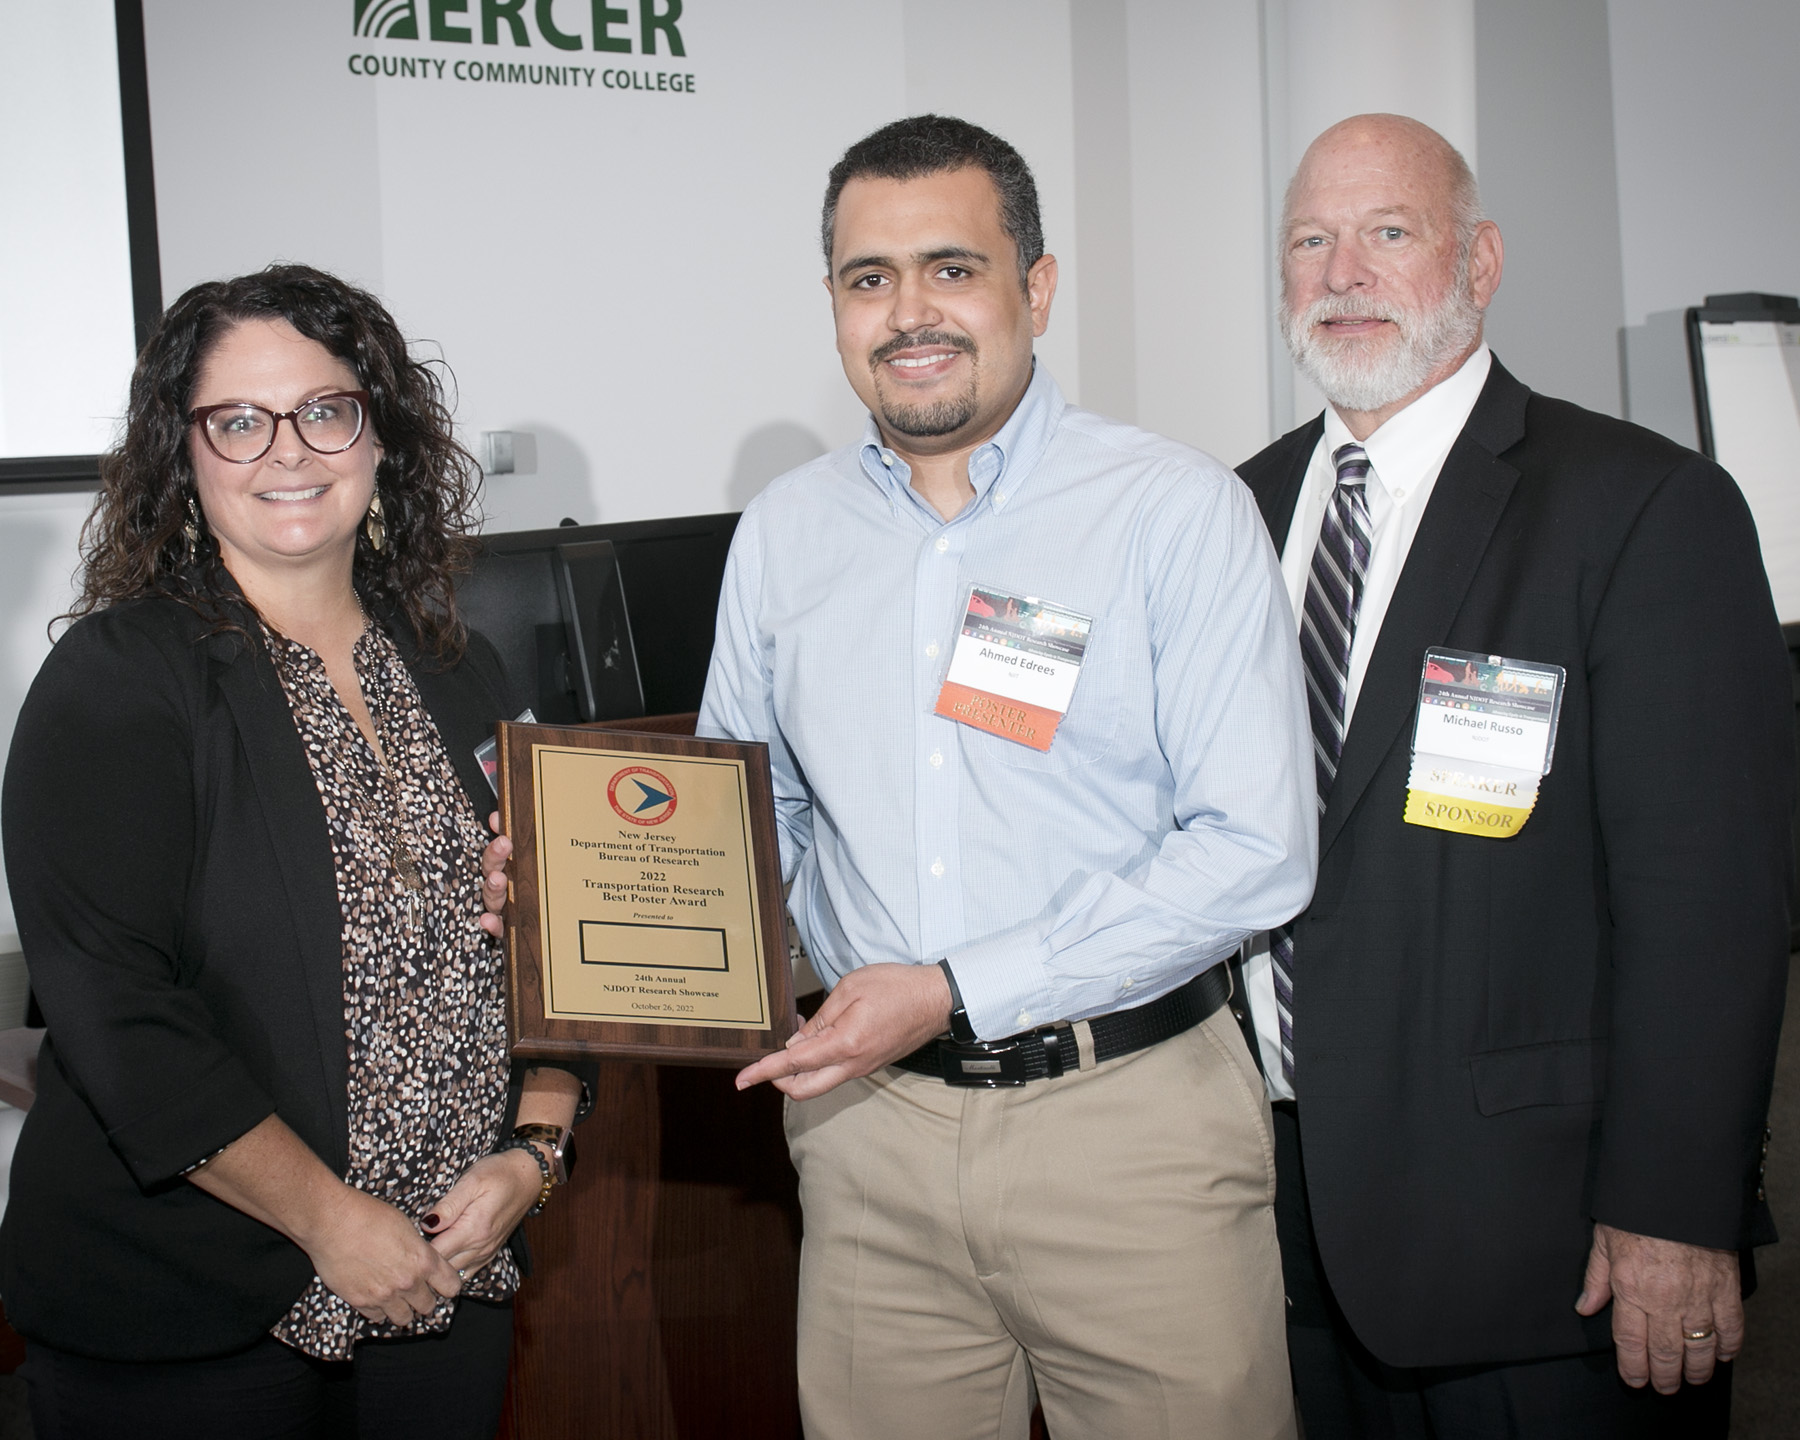 Best Poster Award Recipient, Ahmed Edrees, New Jersey Institute of Technology, Minimizing Total Cost of Work Zones on Two-Lane Roads with Managed Lanes. Photo by Steve Goodman.